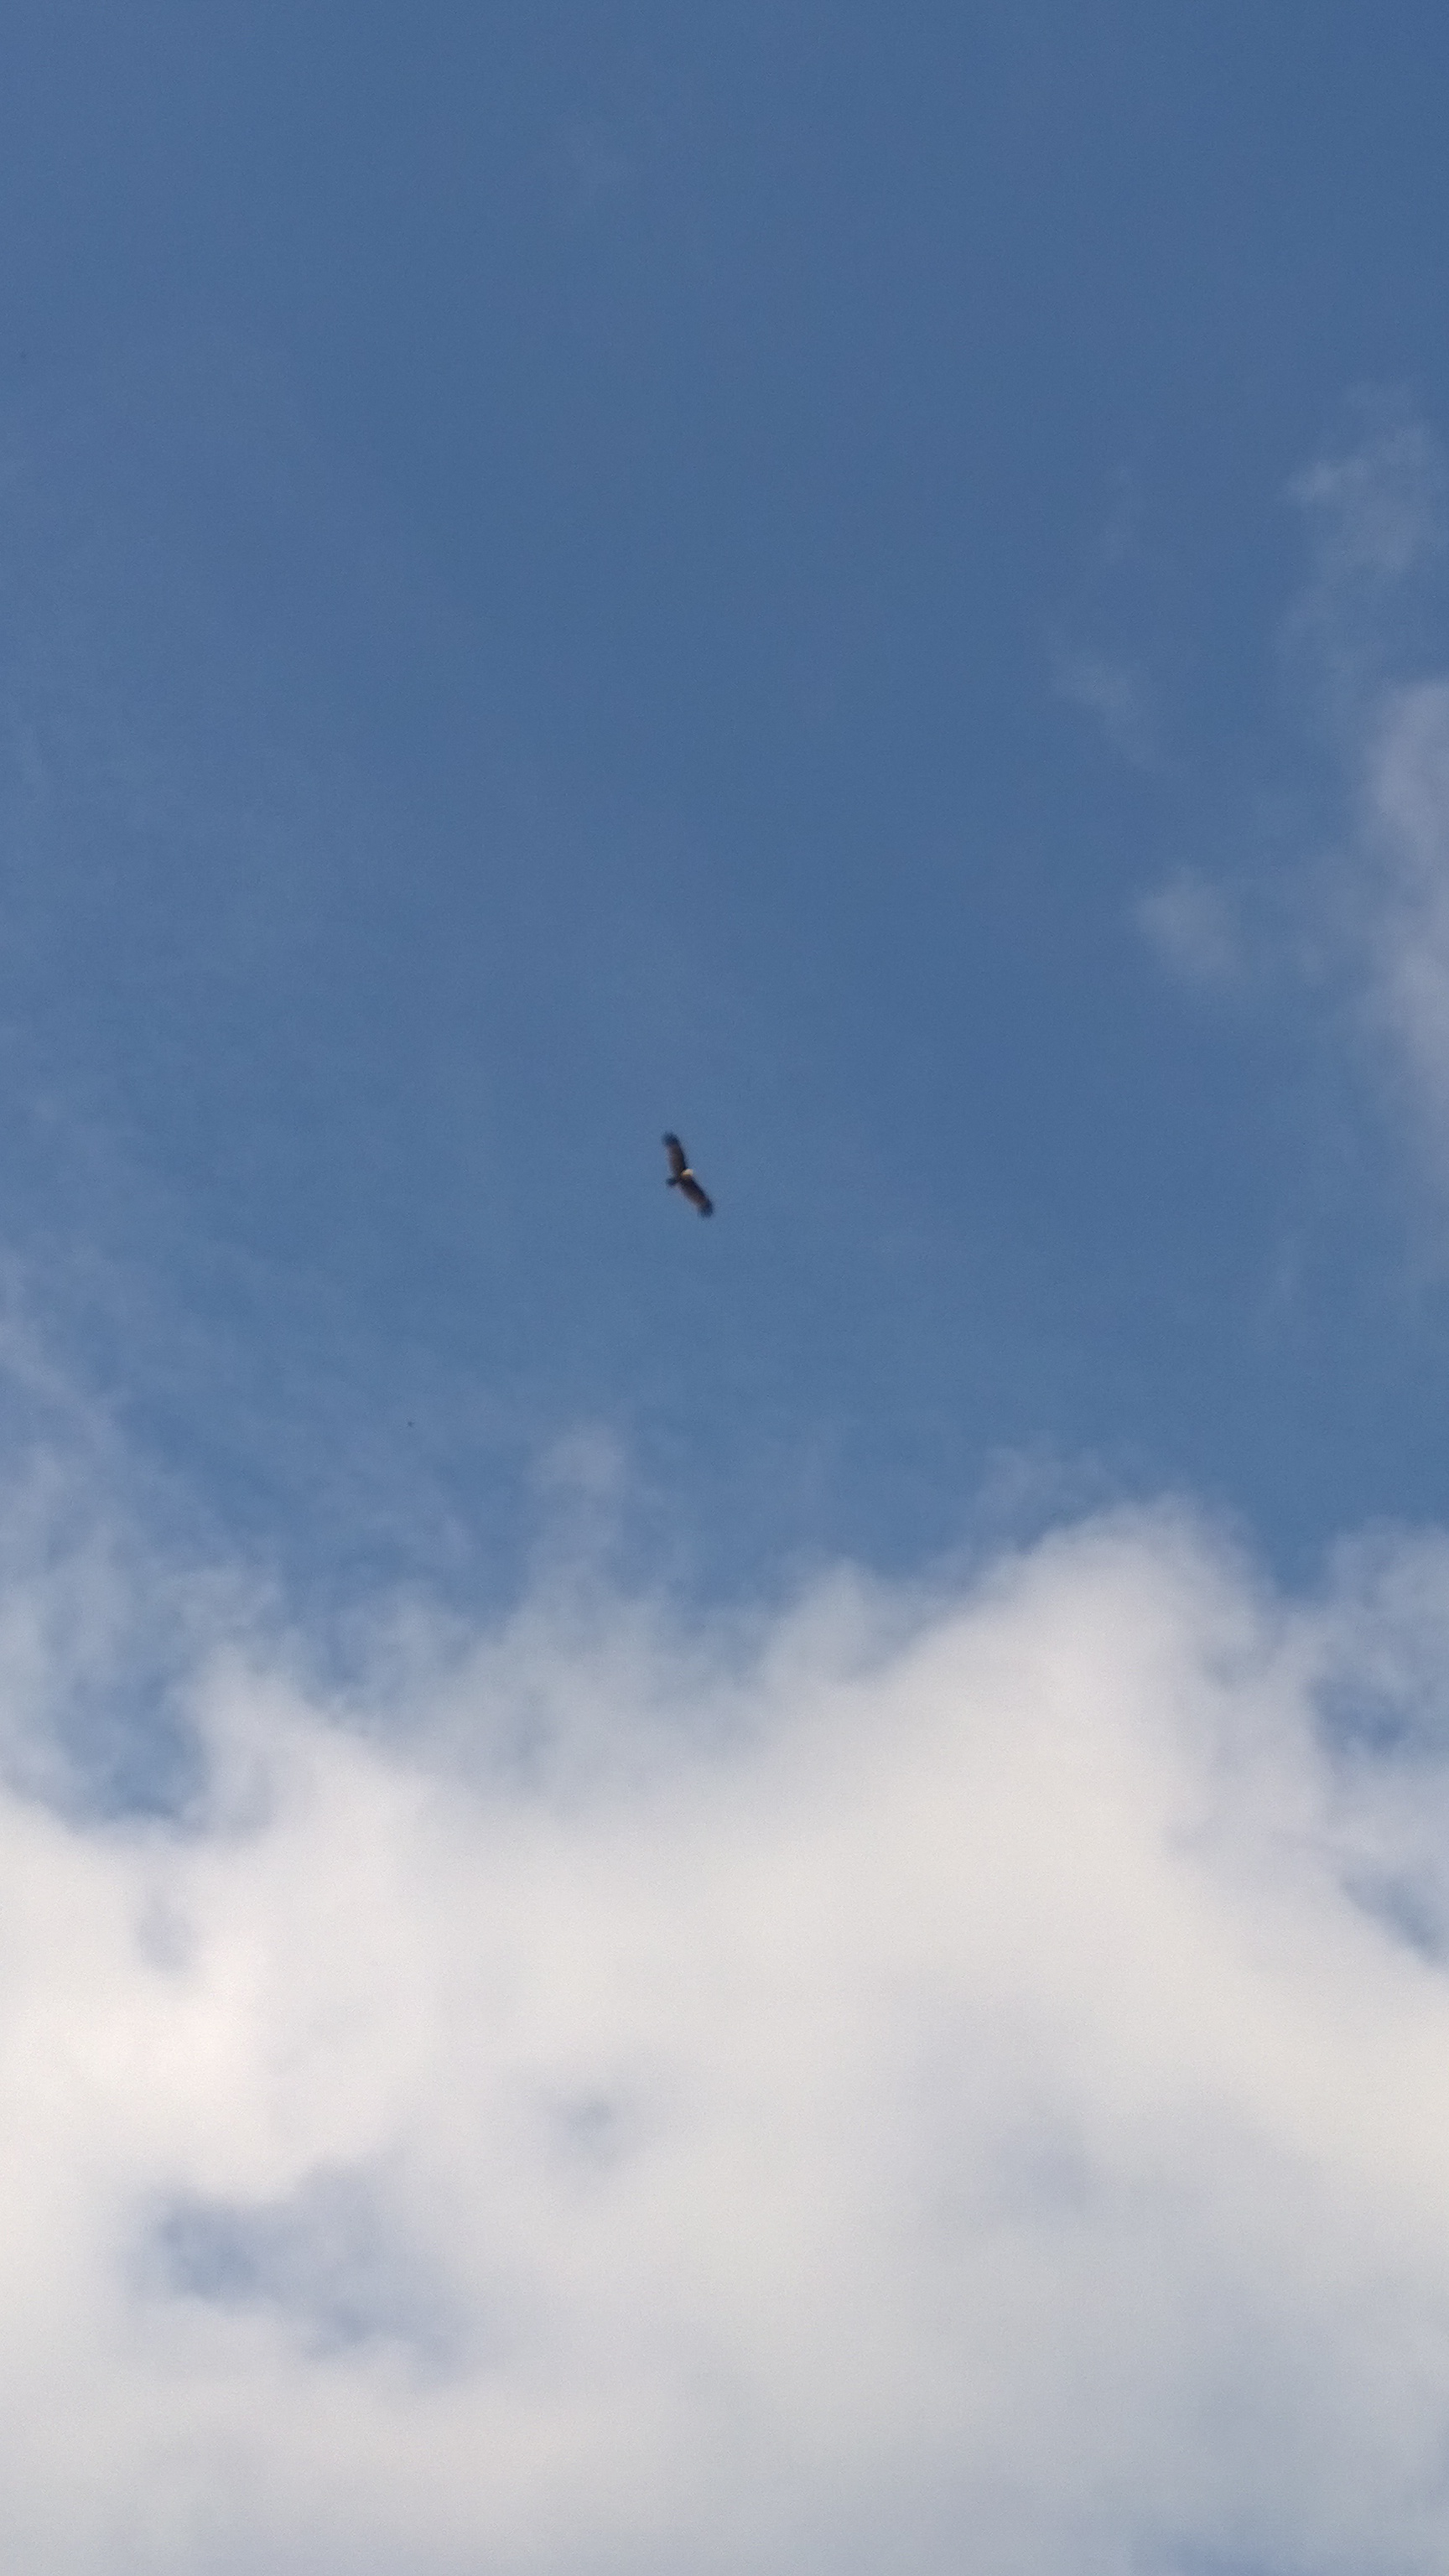 Brahminy kite soaring over Oriental village- this bird is an important cultural symbol in Langkawi